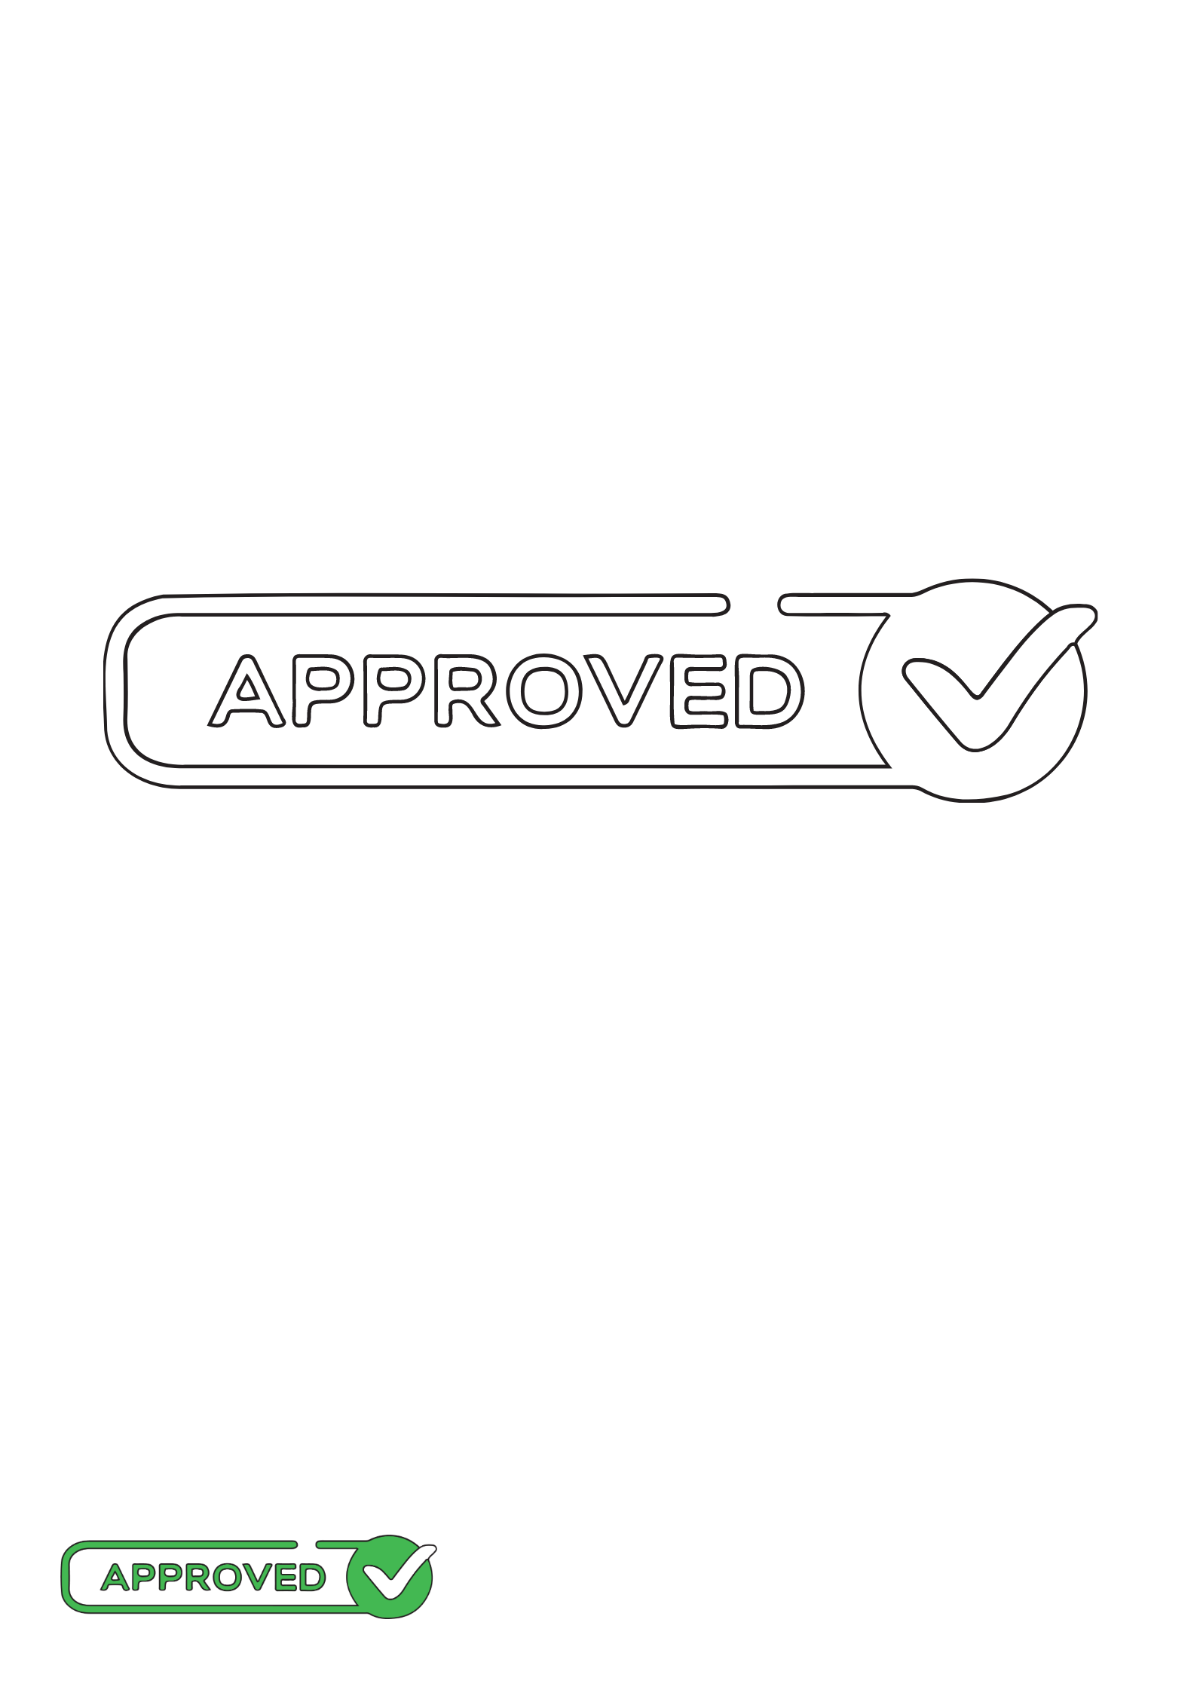 Tick Mark Approved coloring page